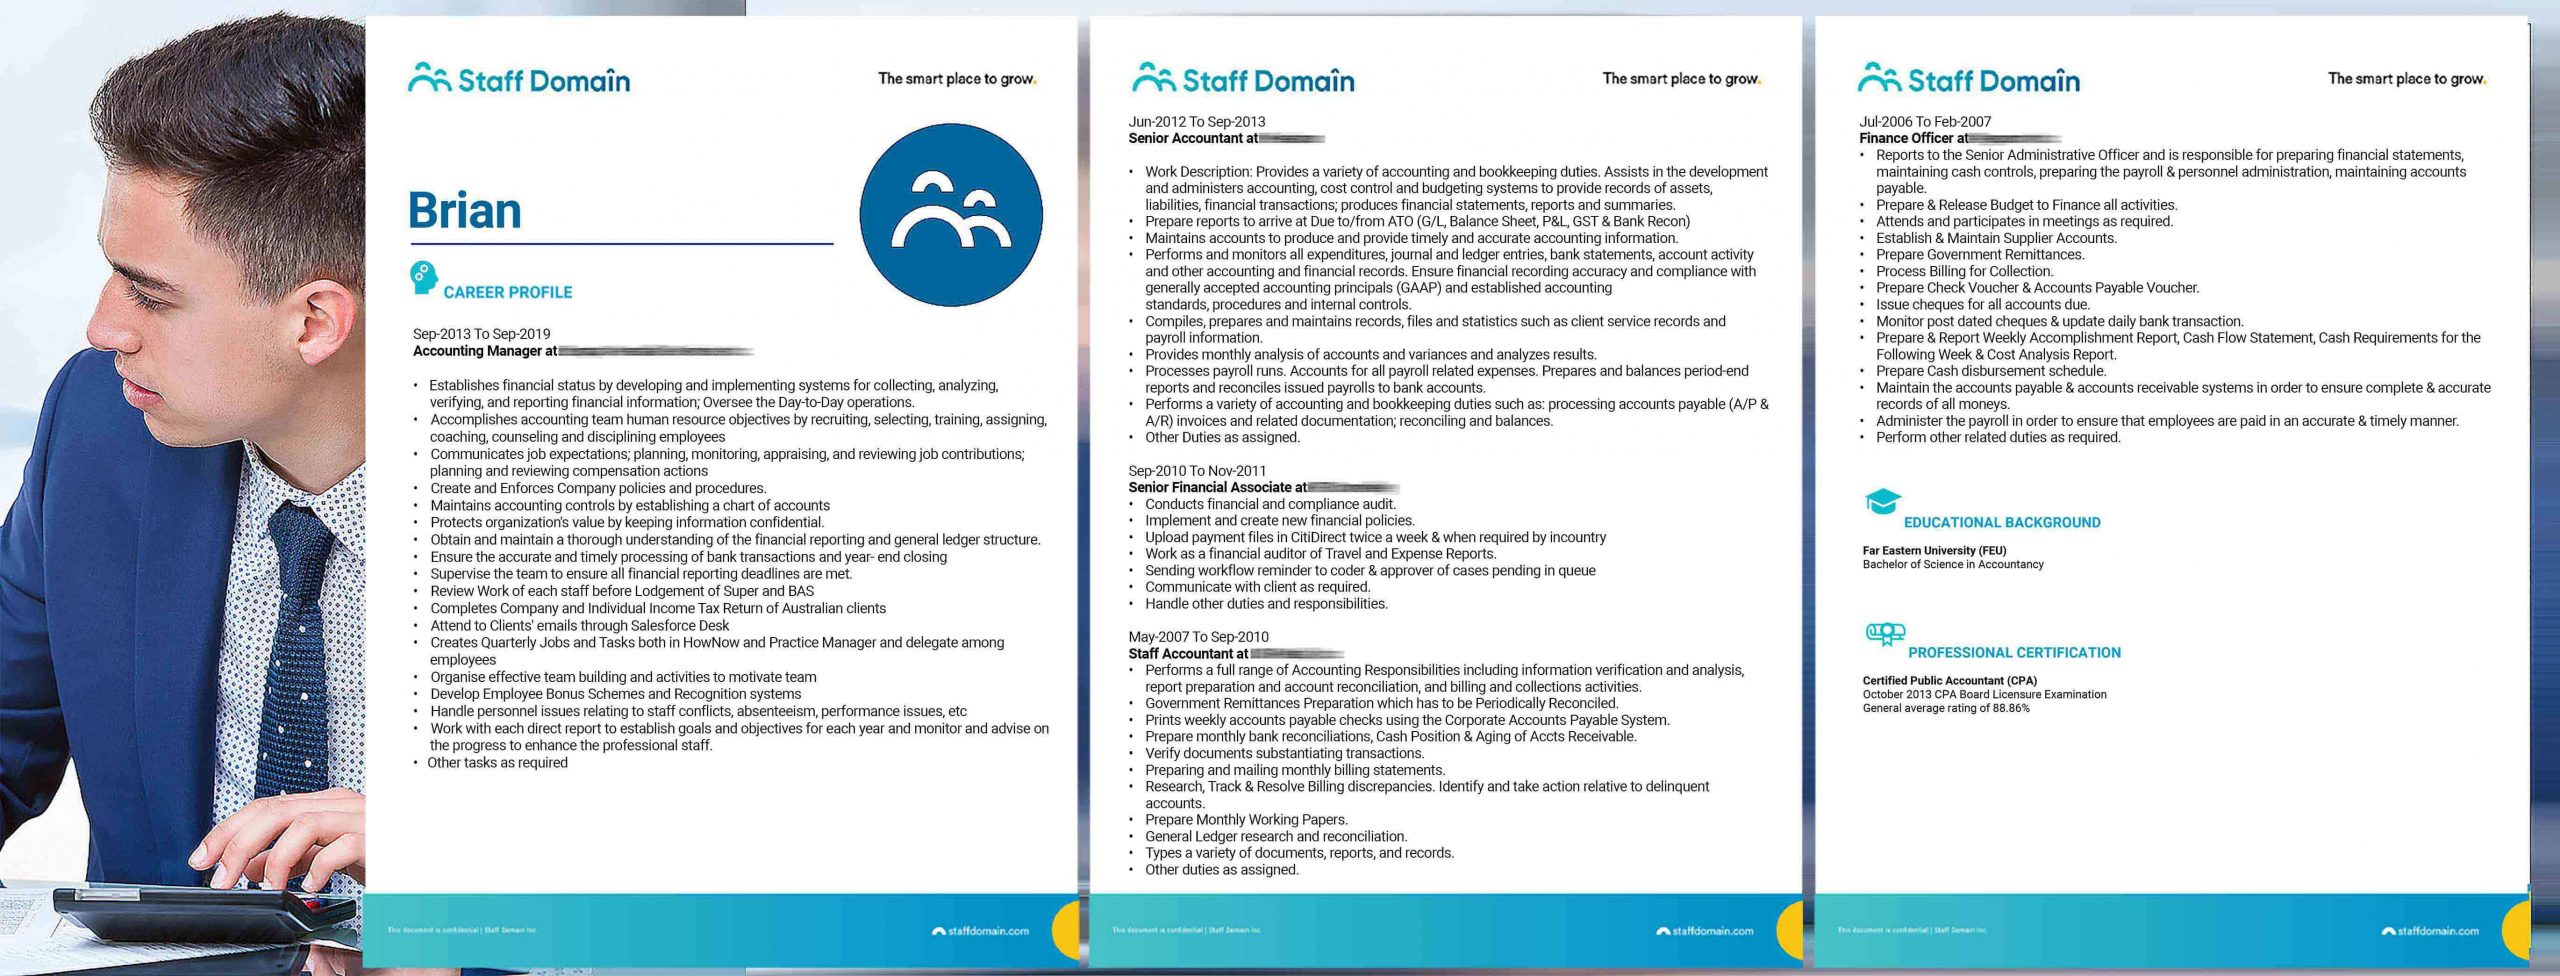 Sample Resume for Cpa Board Passer A Look at the Cv Of A Quality, Filipino Accountant Staff Domain